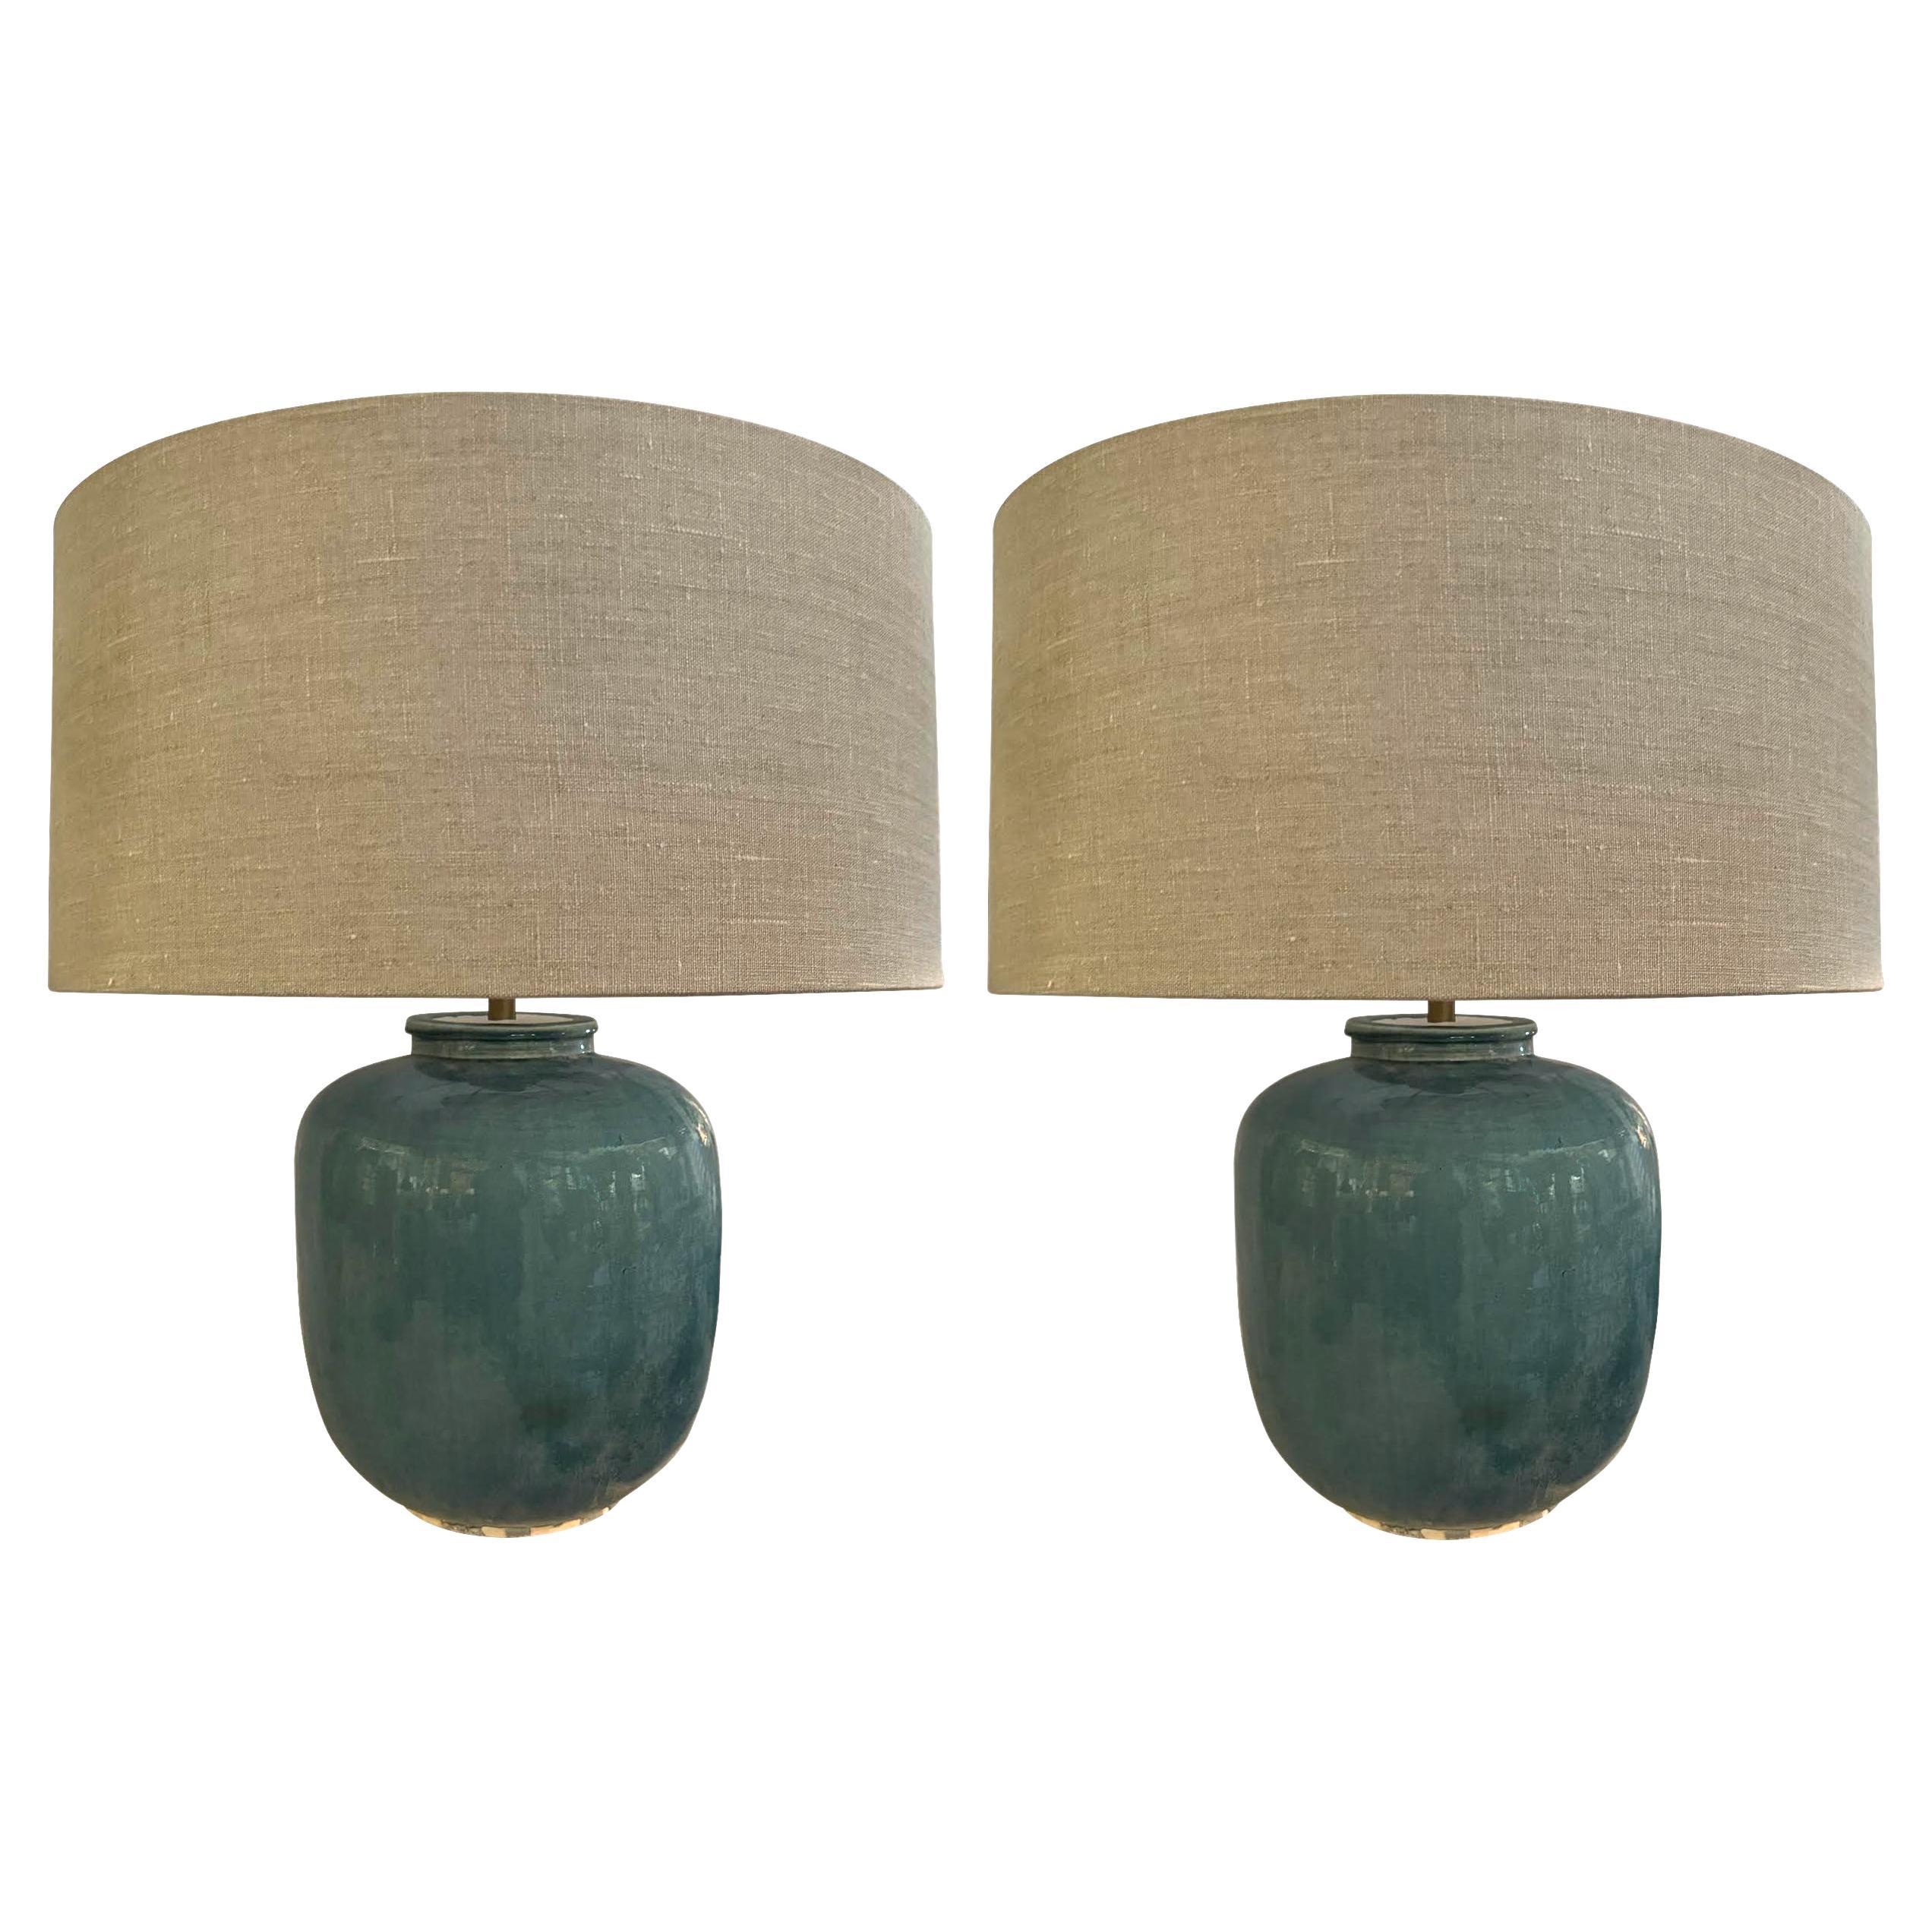 Washed Turquoise Glazed Pair Barrel Shaped Table Lamps With Shades, China For Sale